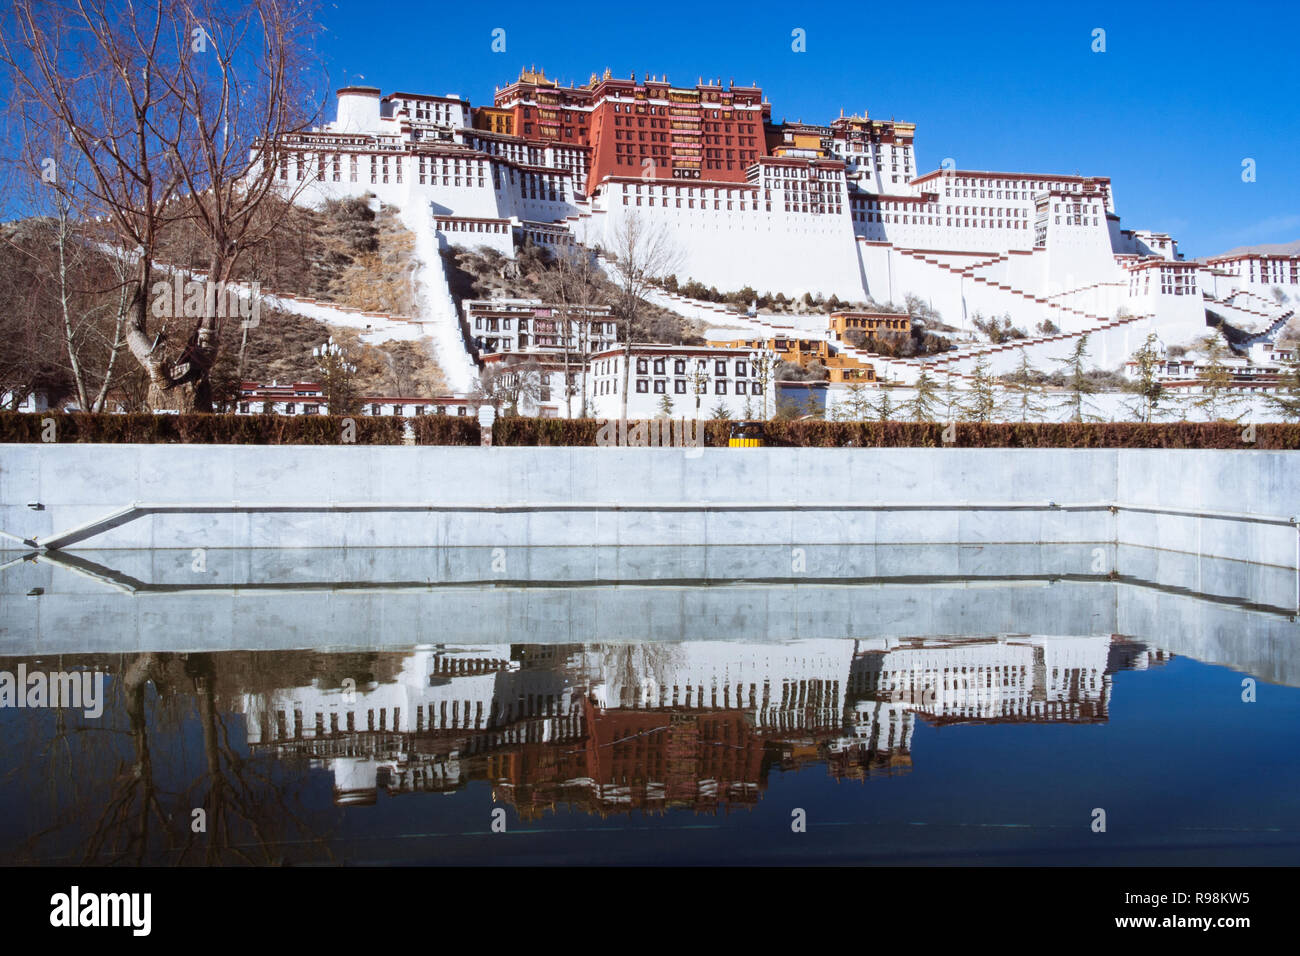 Lhasa, Tibet Autonomous Region, China : Potala palace reflected on a pool. First built in 1645 by the 5th Dalai Lama, the Potala was the residence of  Stock Photo